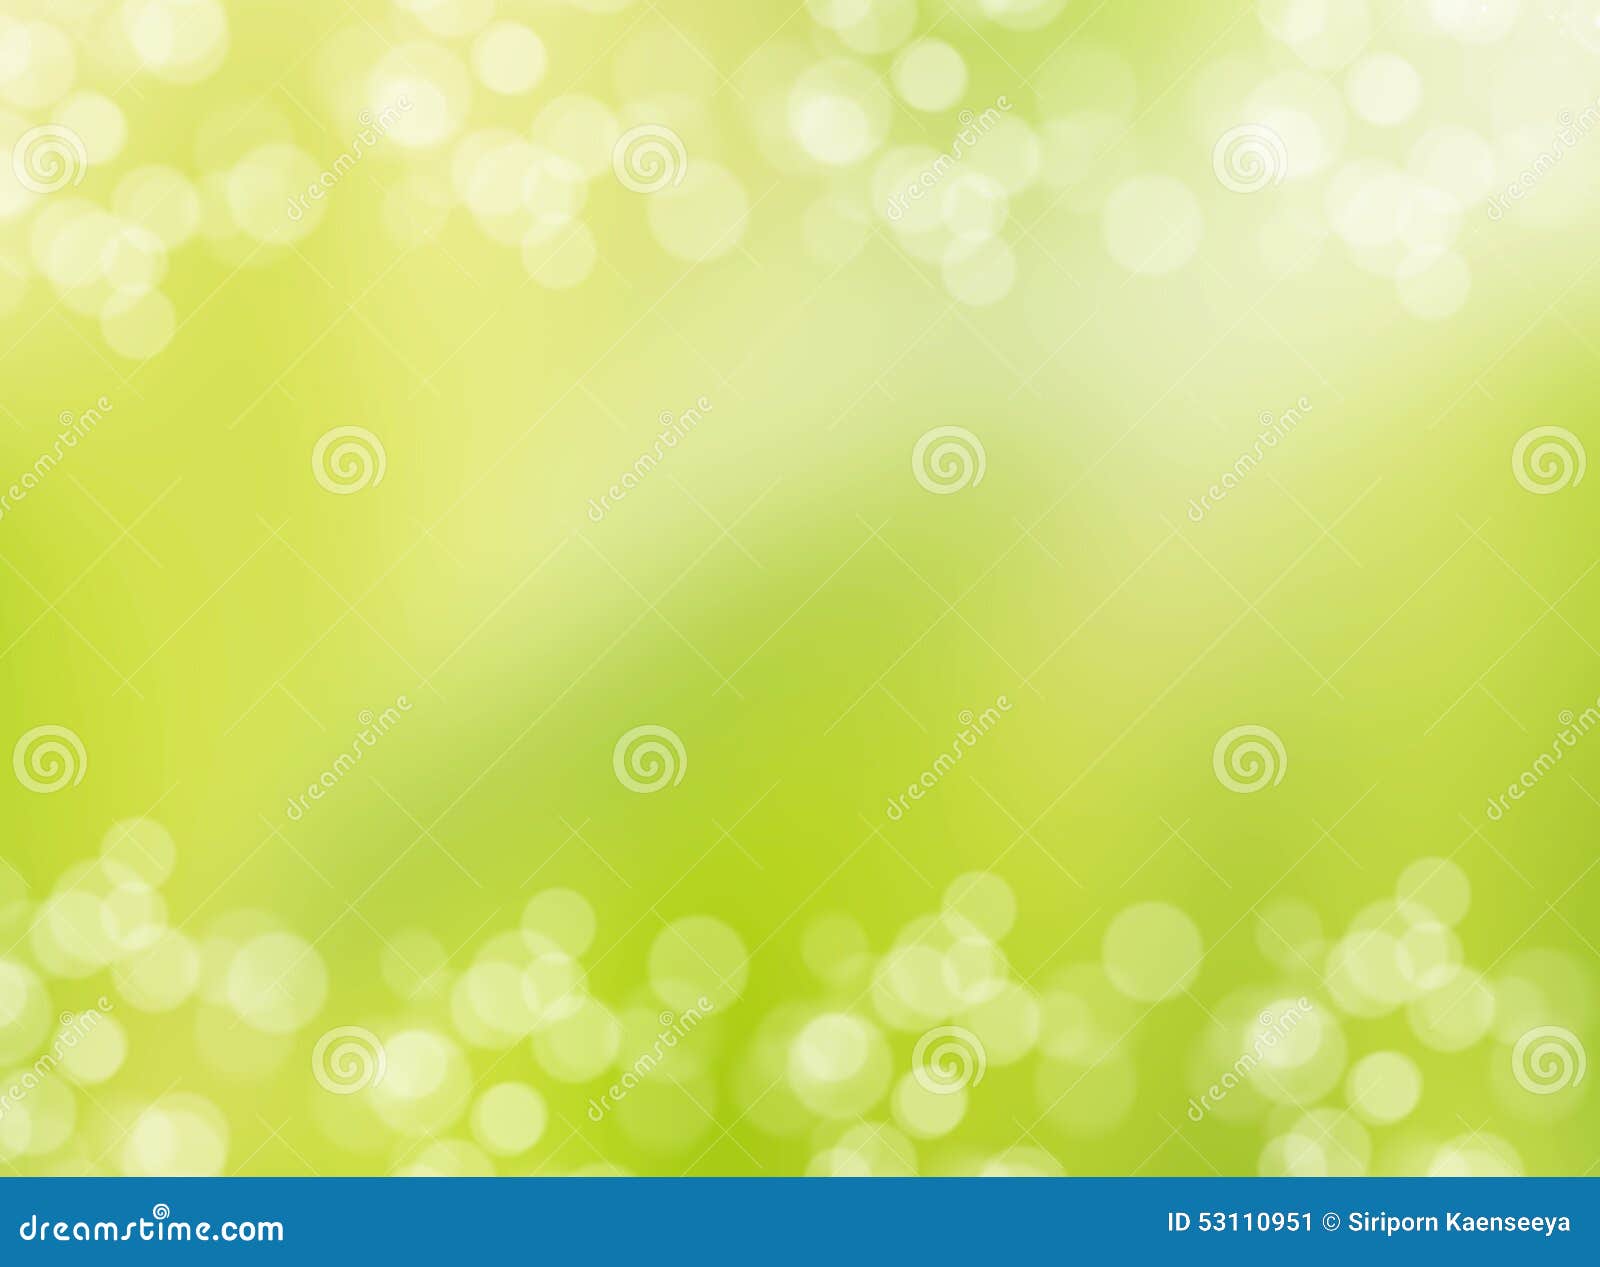 Christmas Green Bokeh Background And Wallpaper Stock Image 